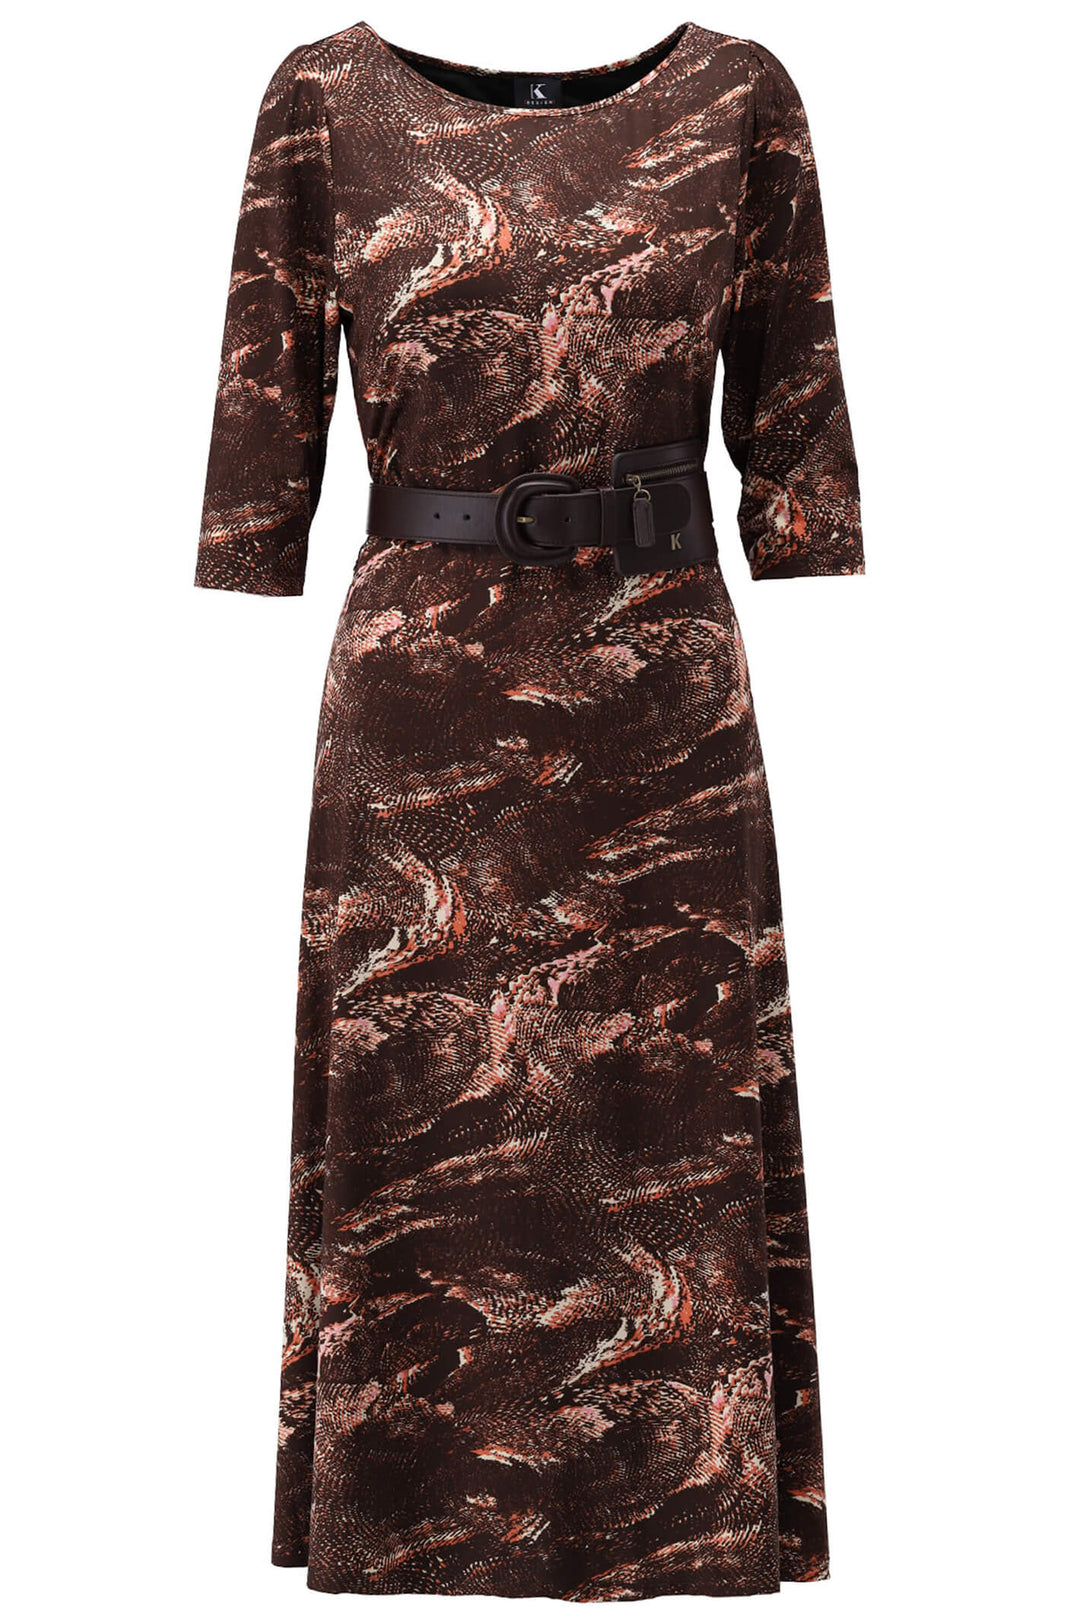 K-Design V315 P445 Brown Marble Print Day Dress With Belt - Experience Boutique